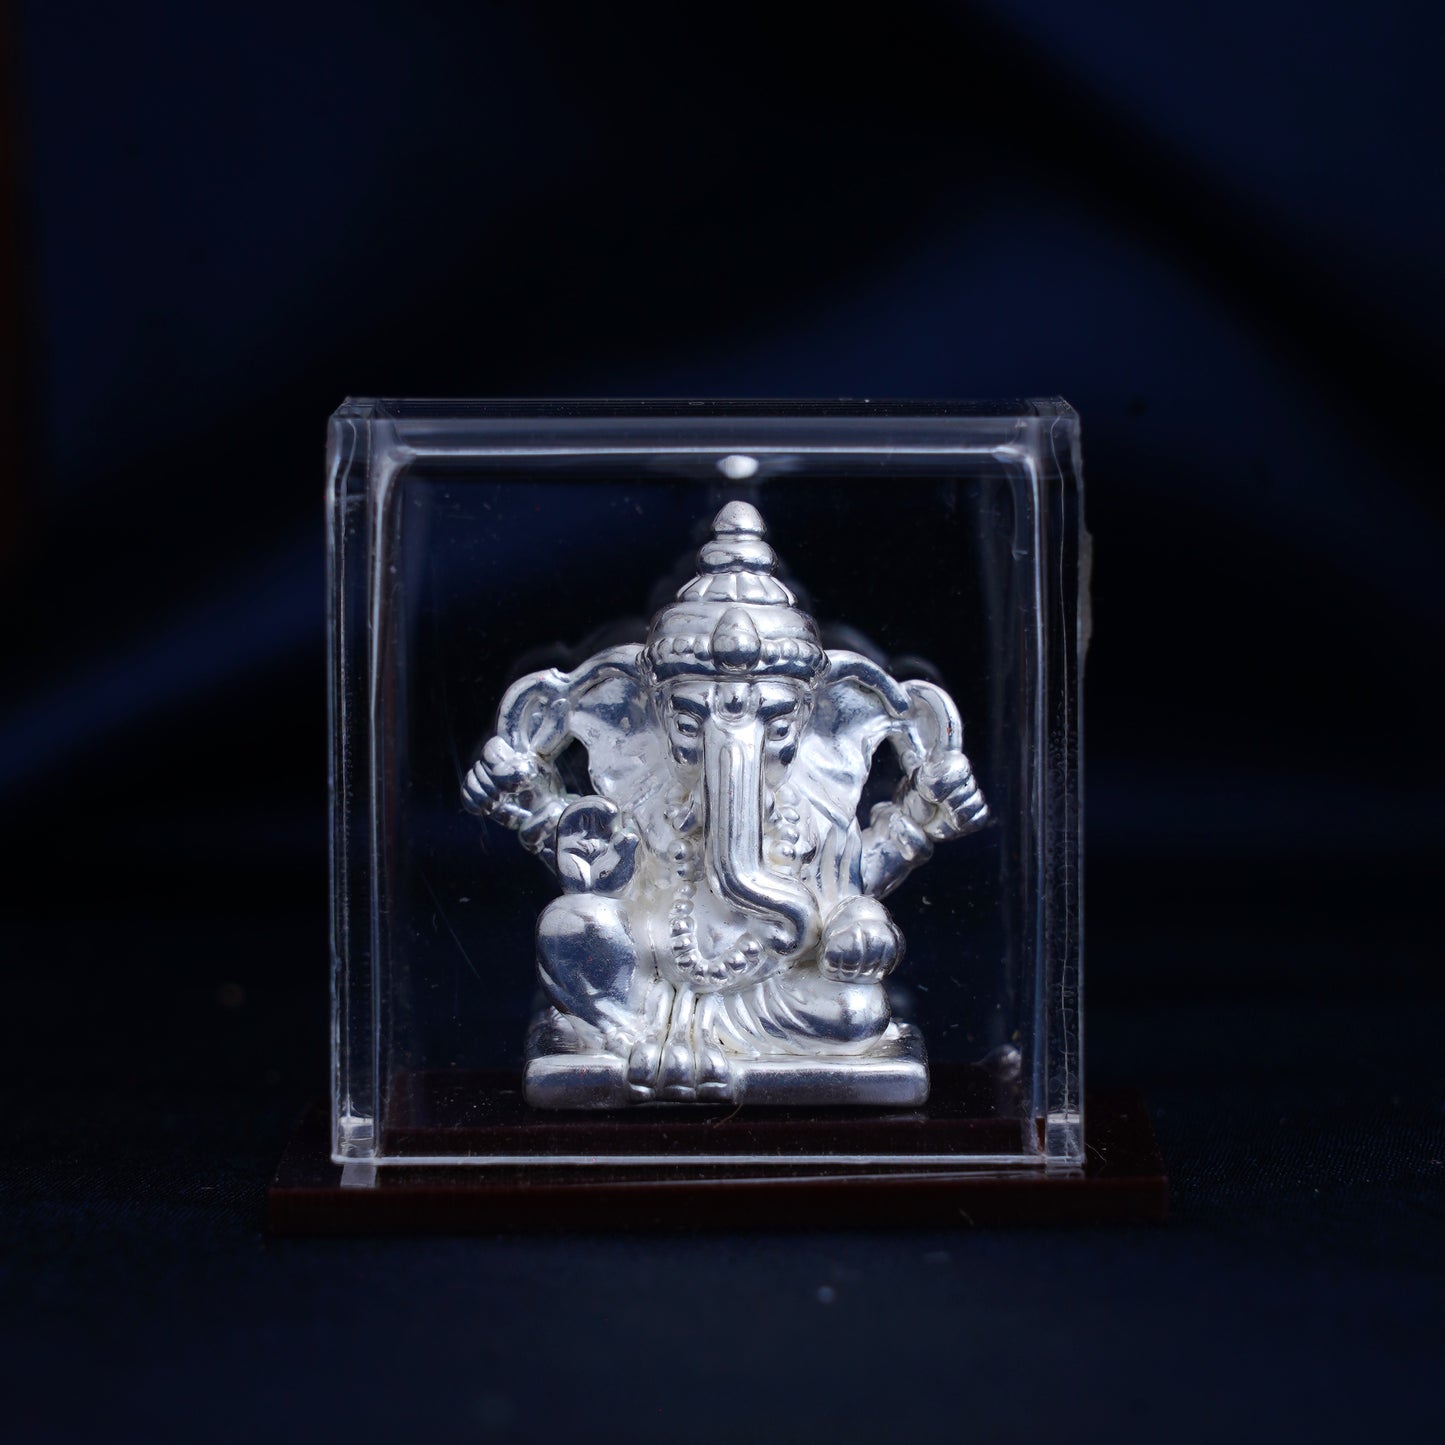 Silver Hollow Lord Ganesha / Ganpati Murti for Home Temple and Pooja Room